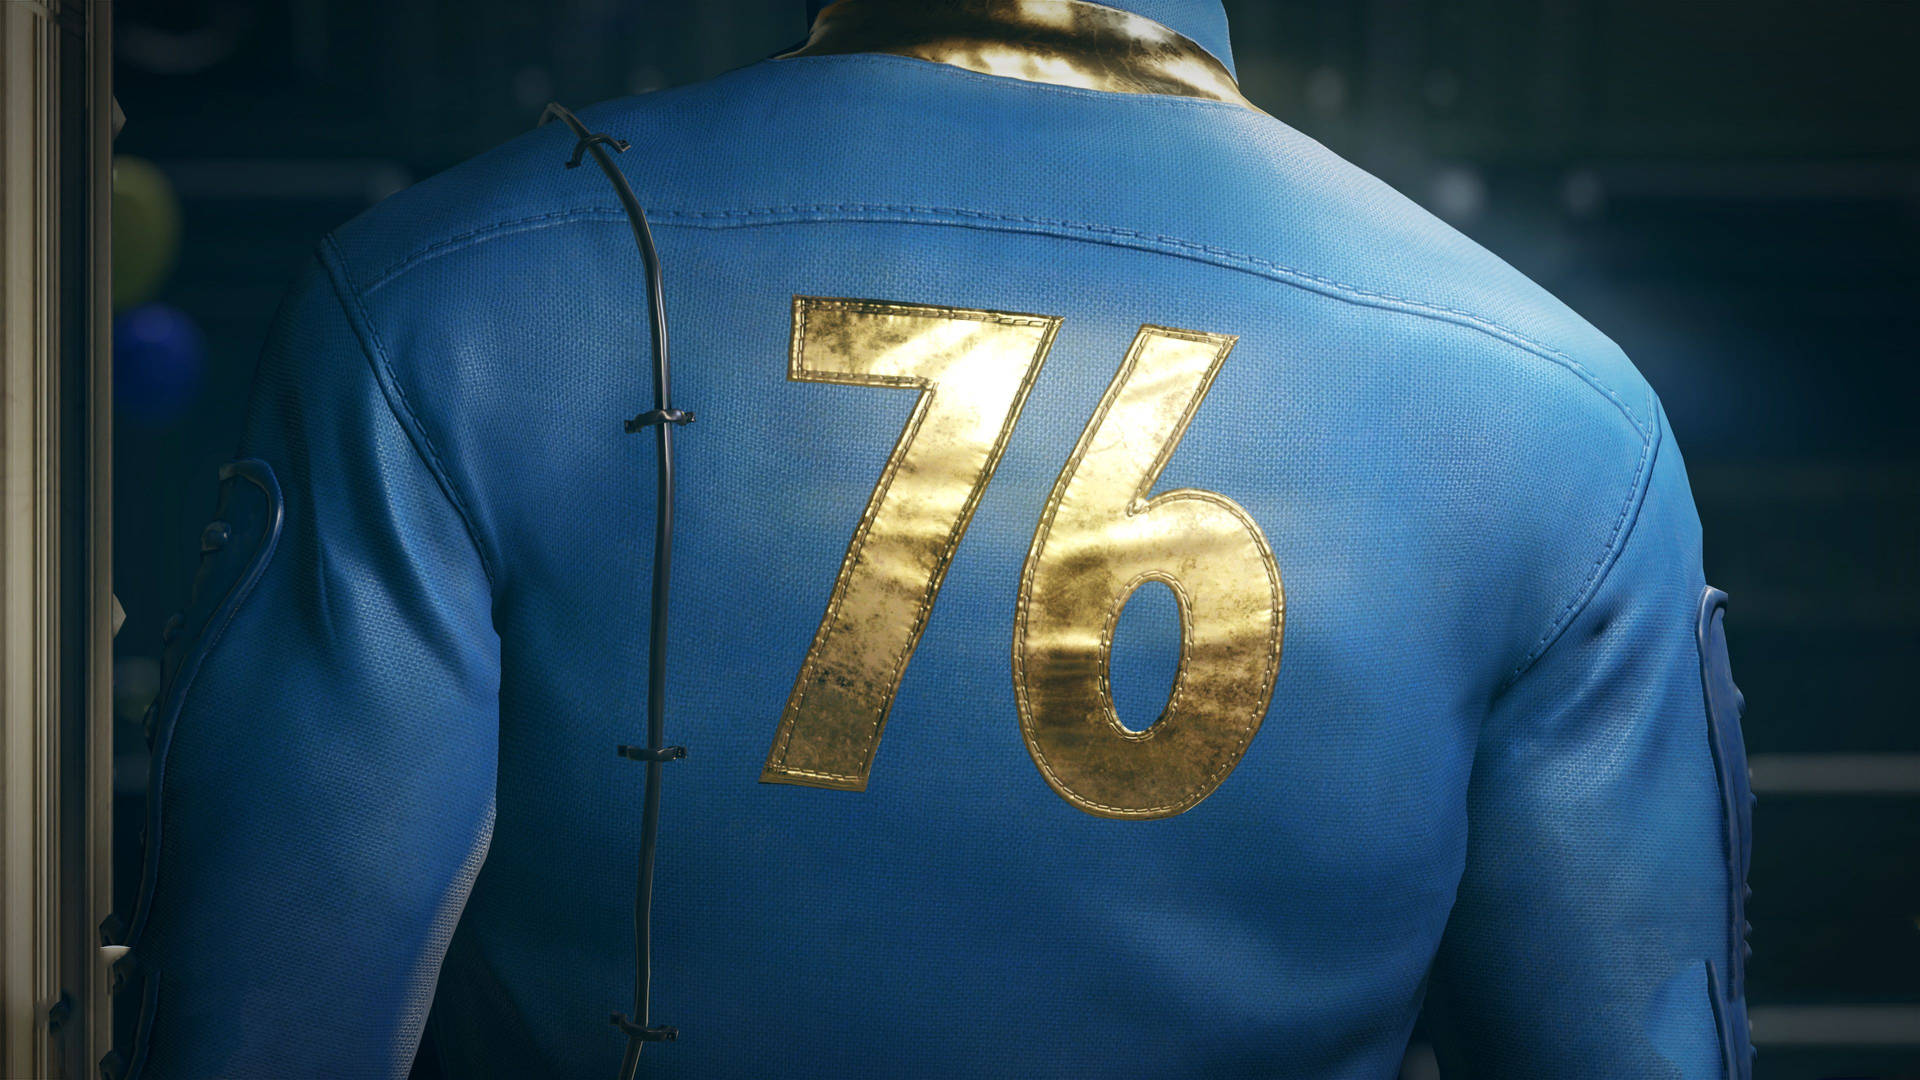 3840X2160 Fallout 76 Wallpaper and Background